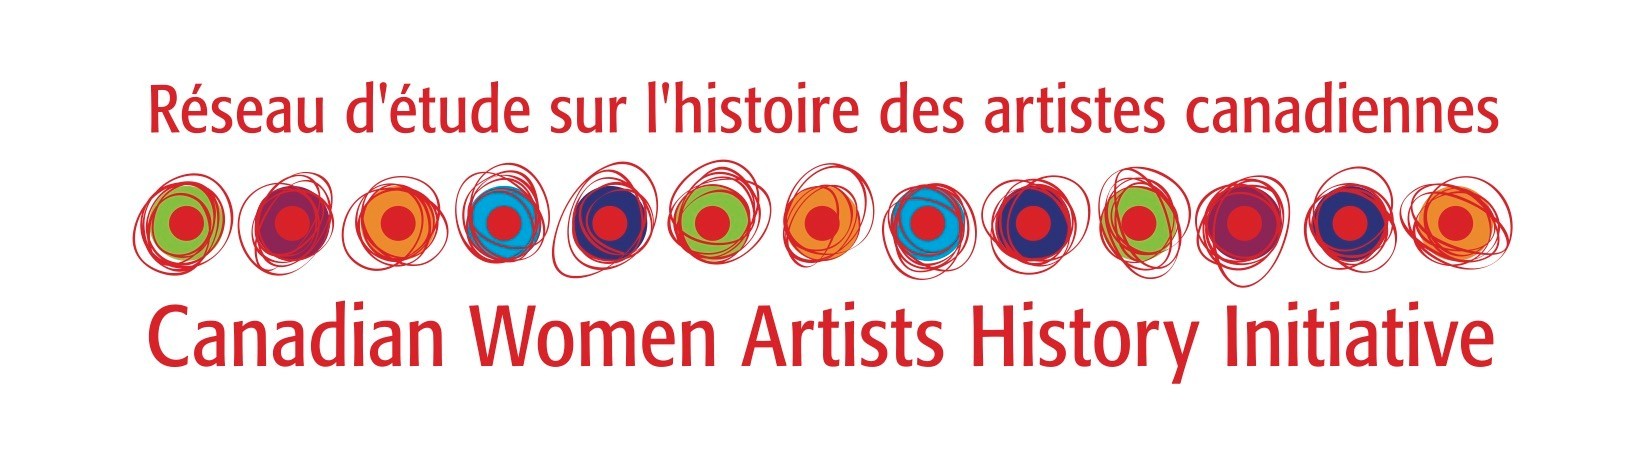 Call for Papers and New Dates - Canadian Women Artists History Initiative Conference